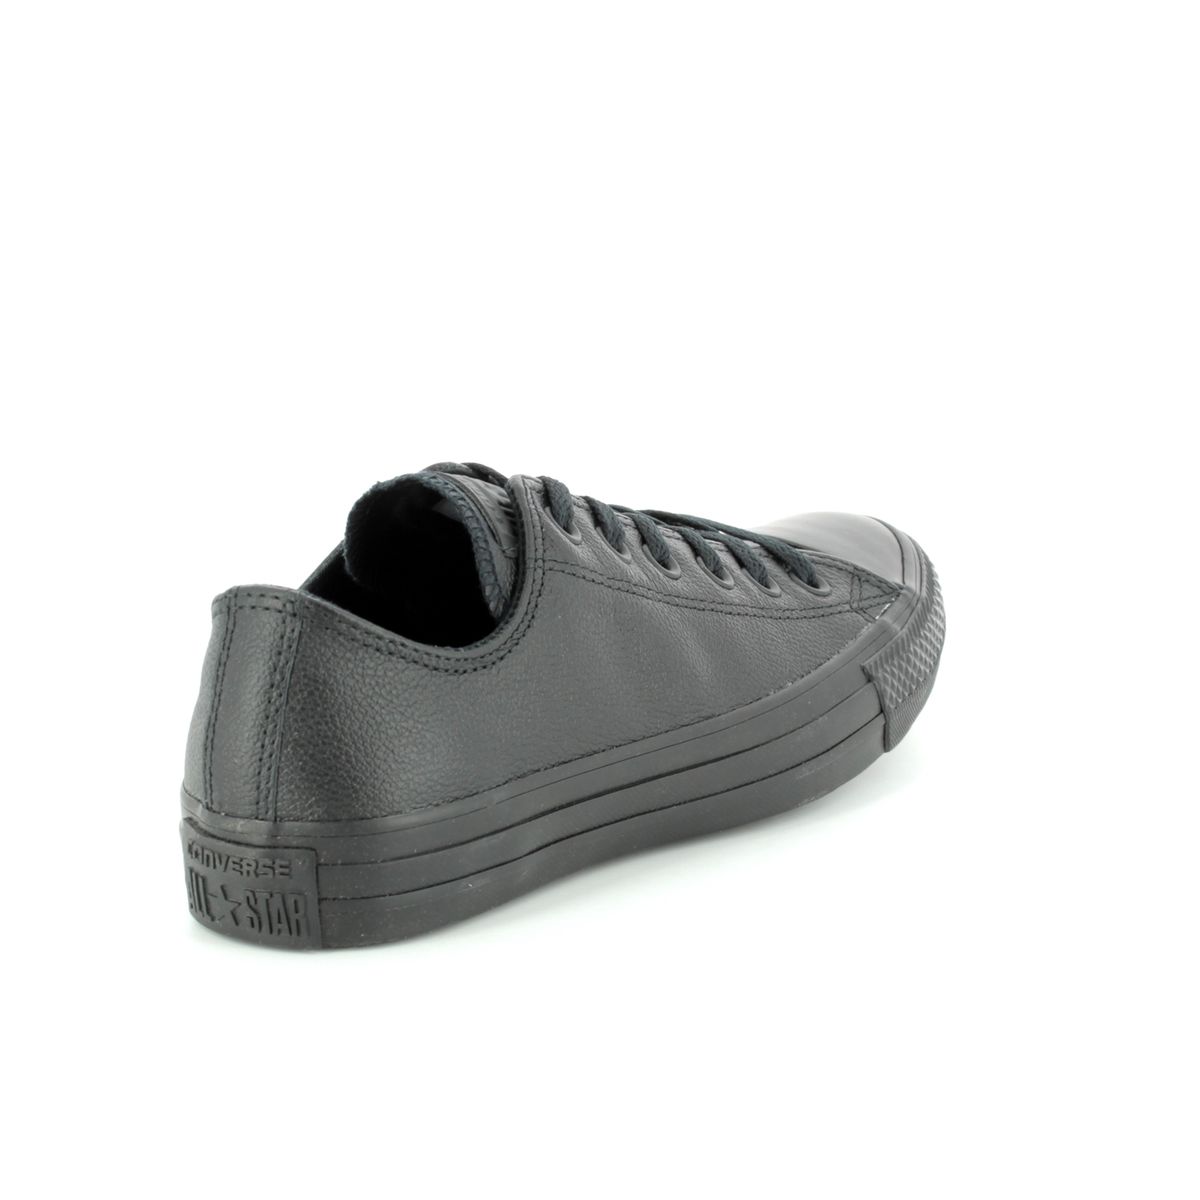 converse black all star leather mono ox trainers